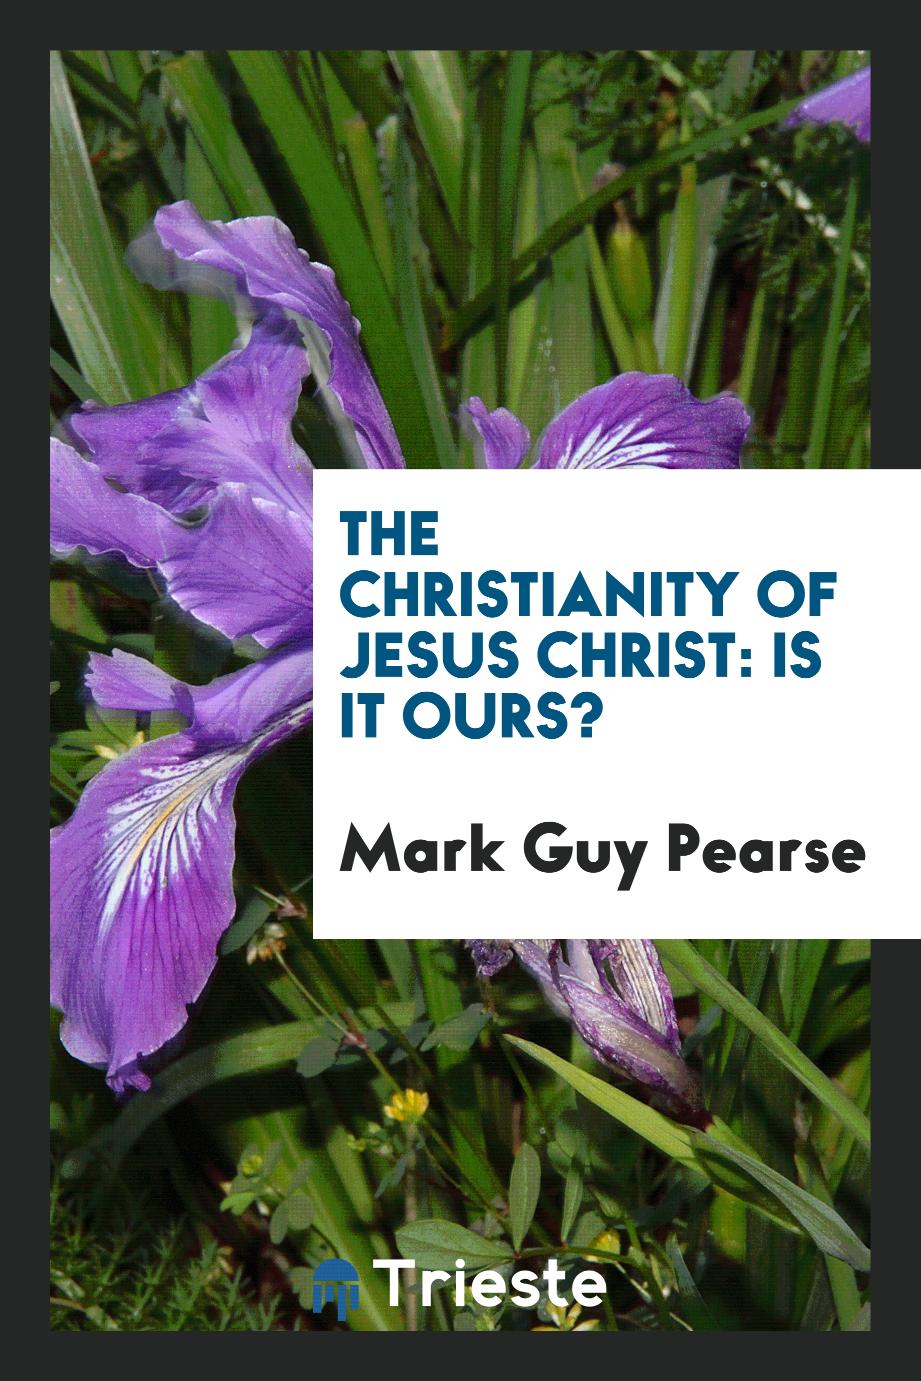 The christianity of Jesus Christ: is it ours?